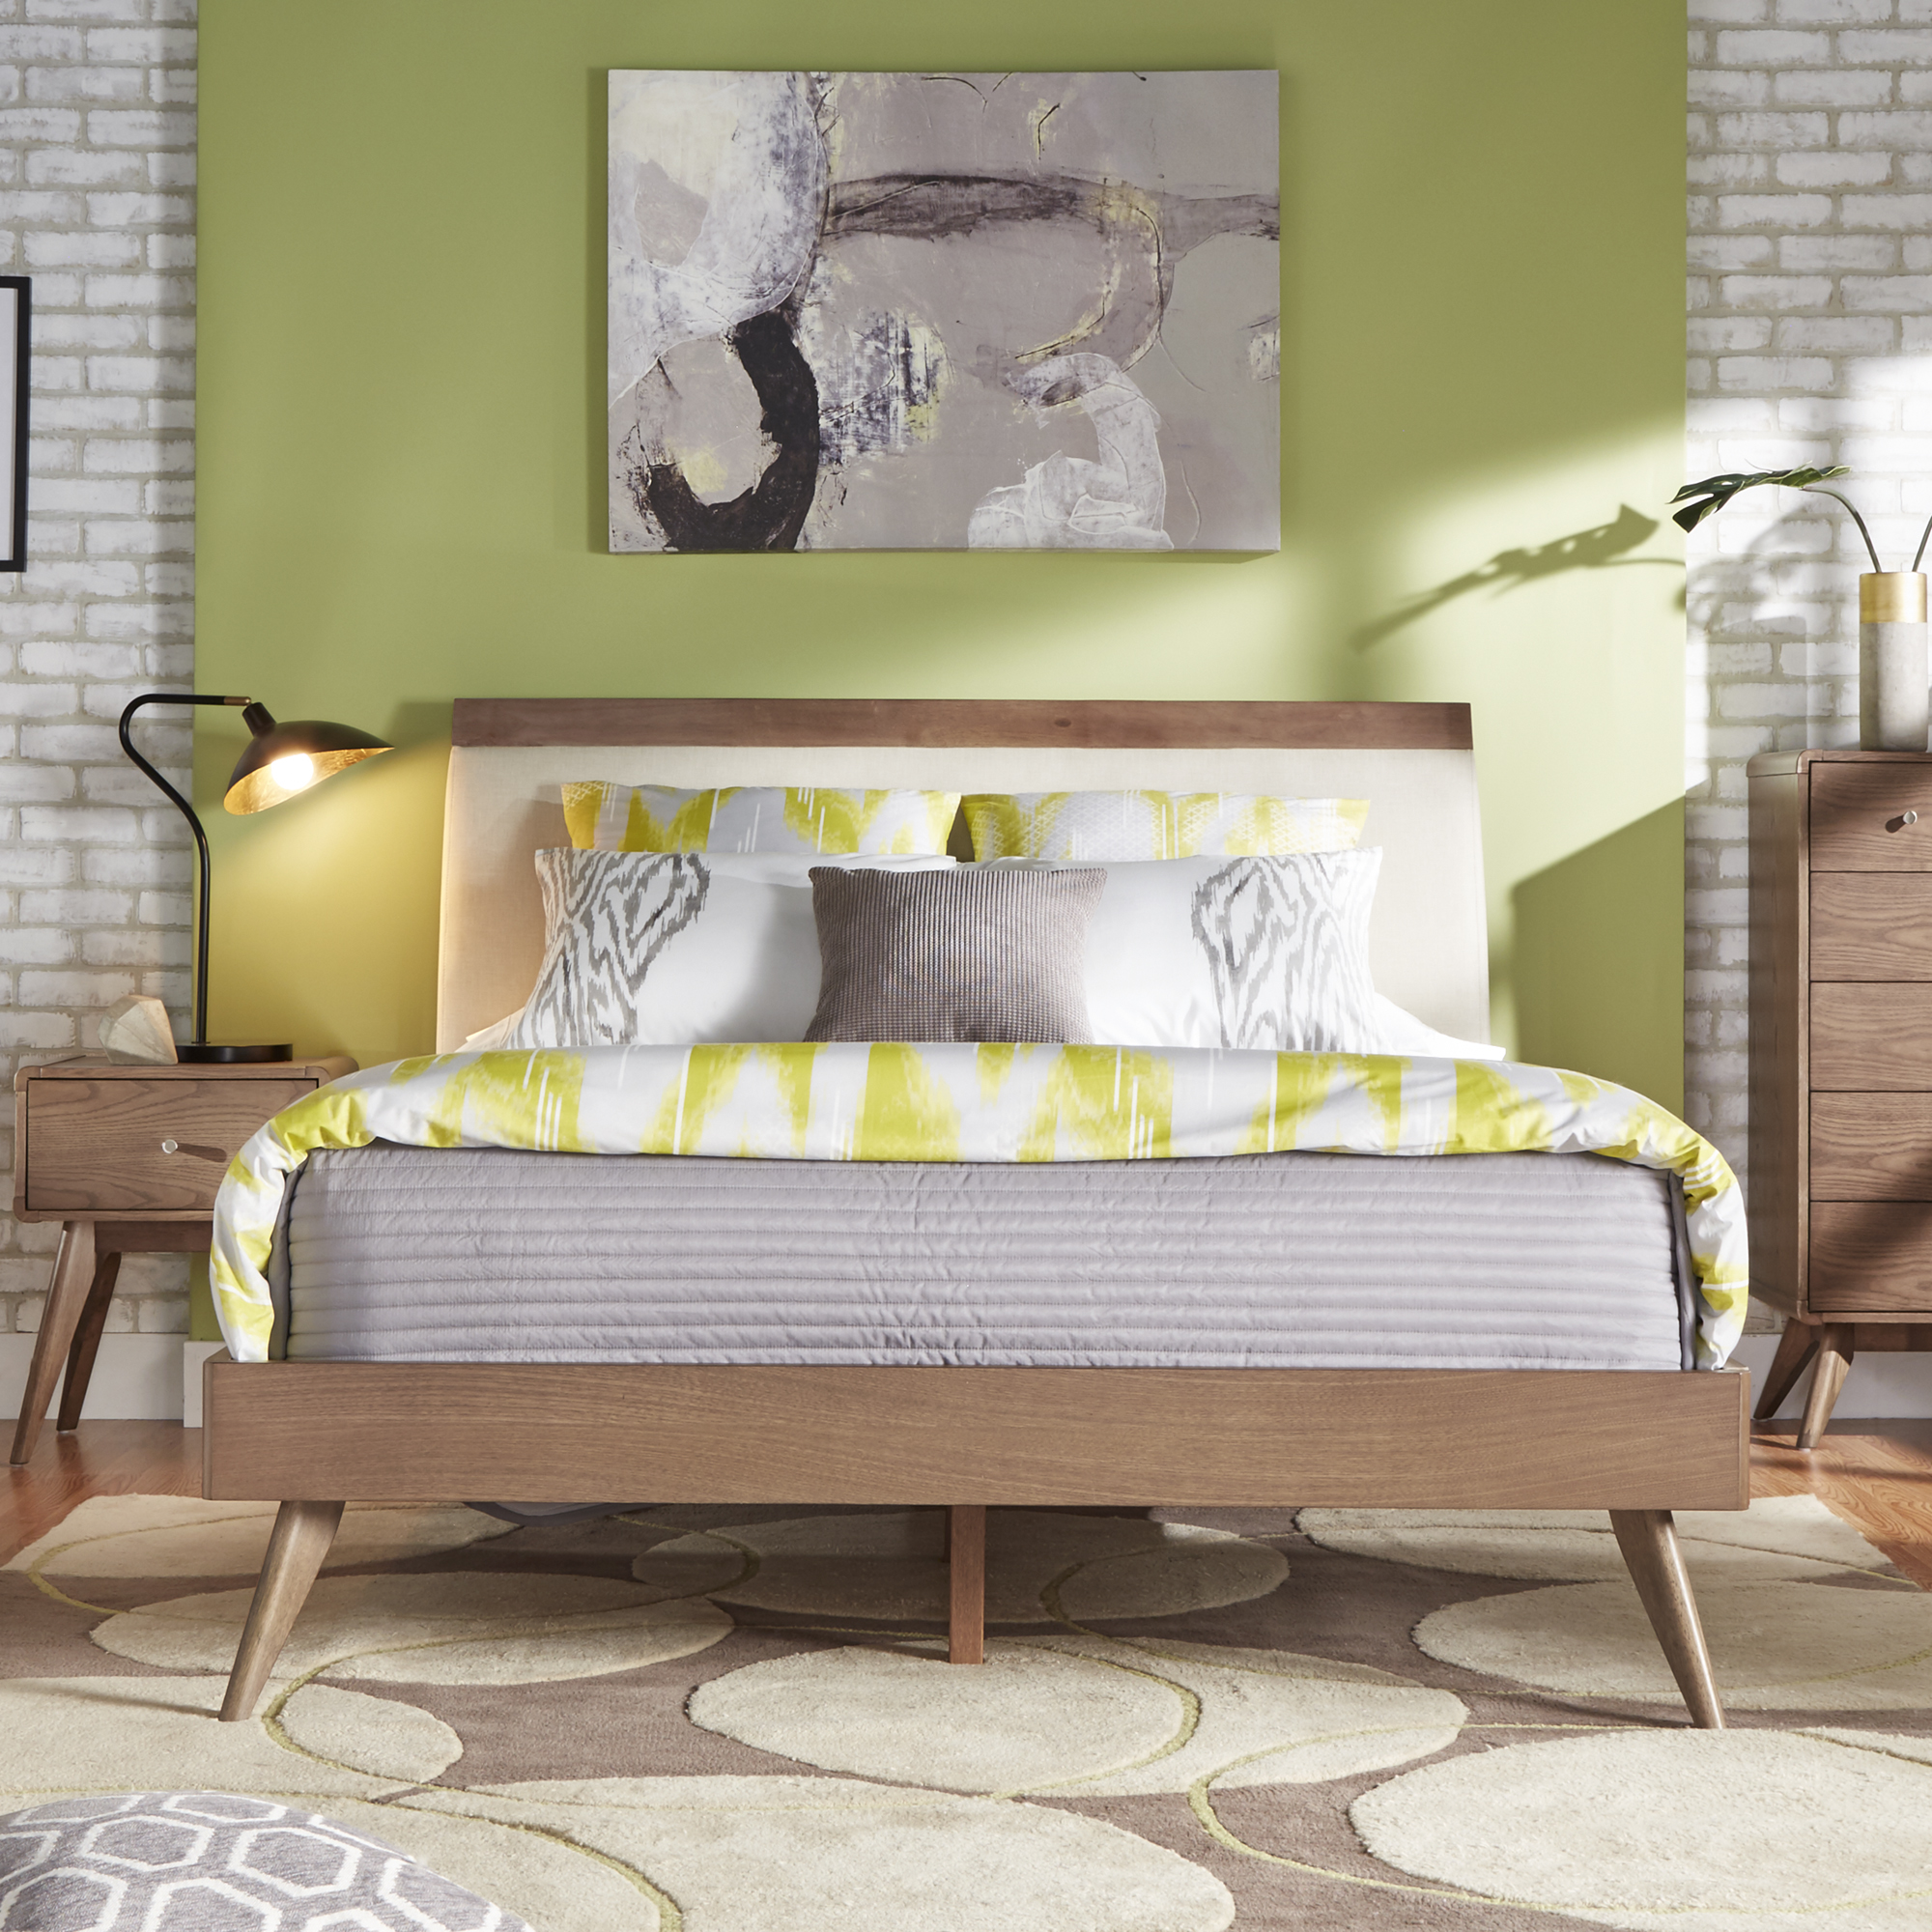 This one of home design trends is all about going bold with paint. This image has a mid-century modern themed bedroom, including furniture with natural wood finishes. What stands out in this image is that the bed is set against a bright green accent wall, which matches the green, grey, and white bedding.